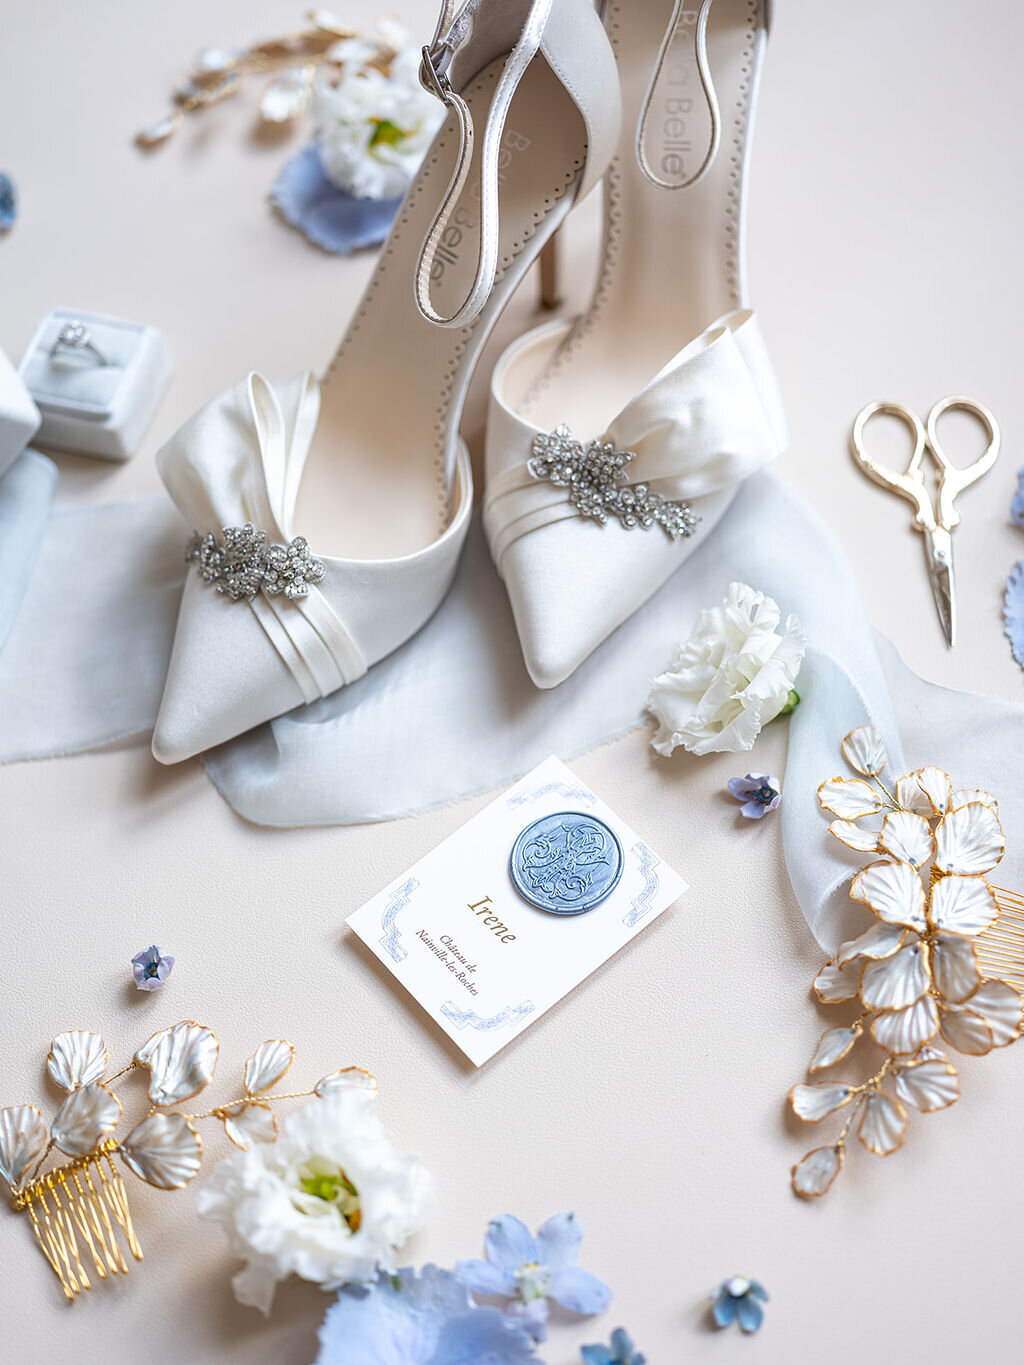 Wedding accessories in ivory and blue shades